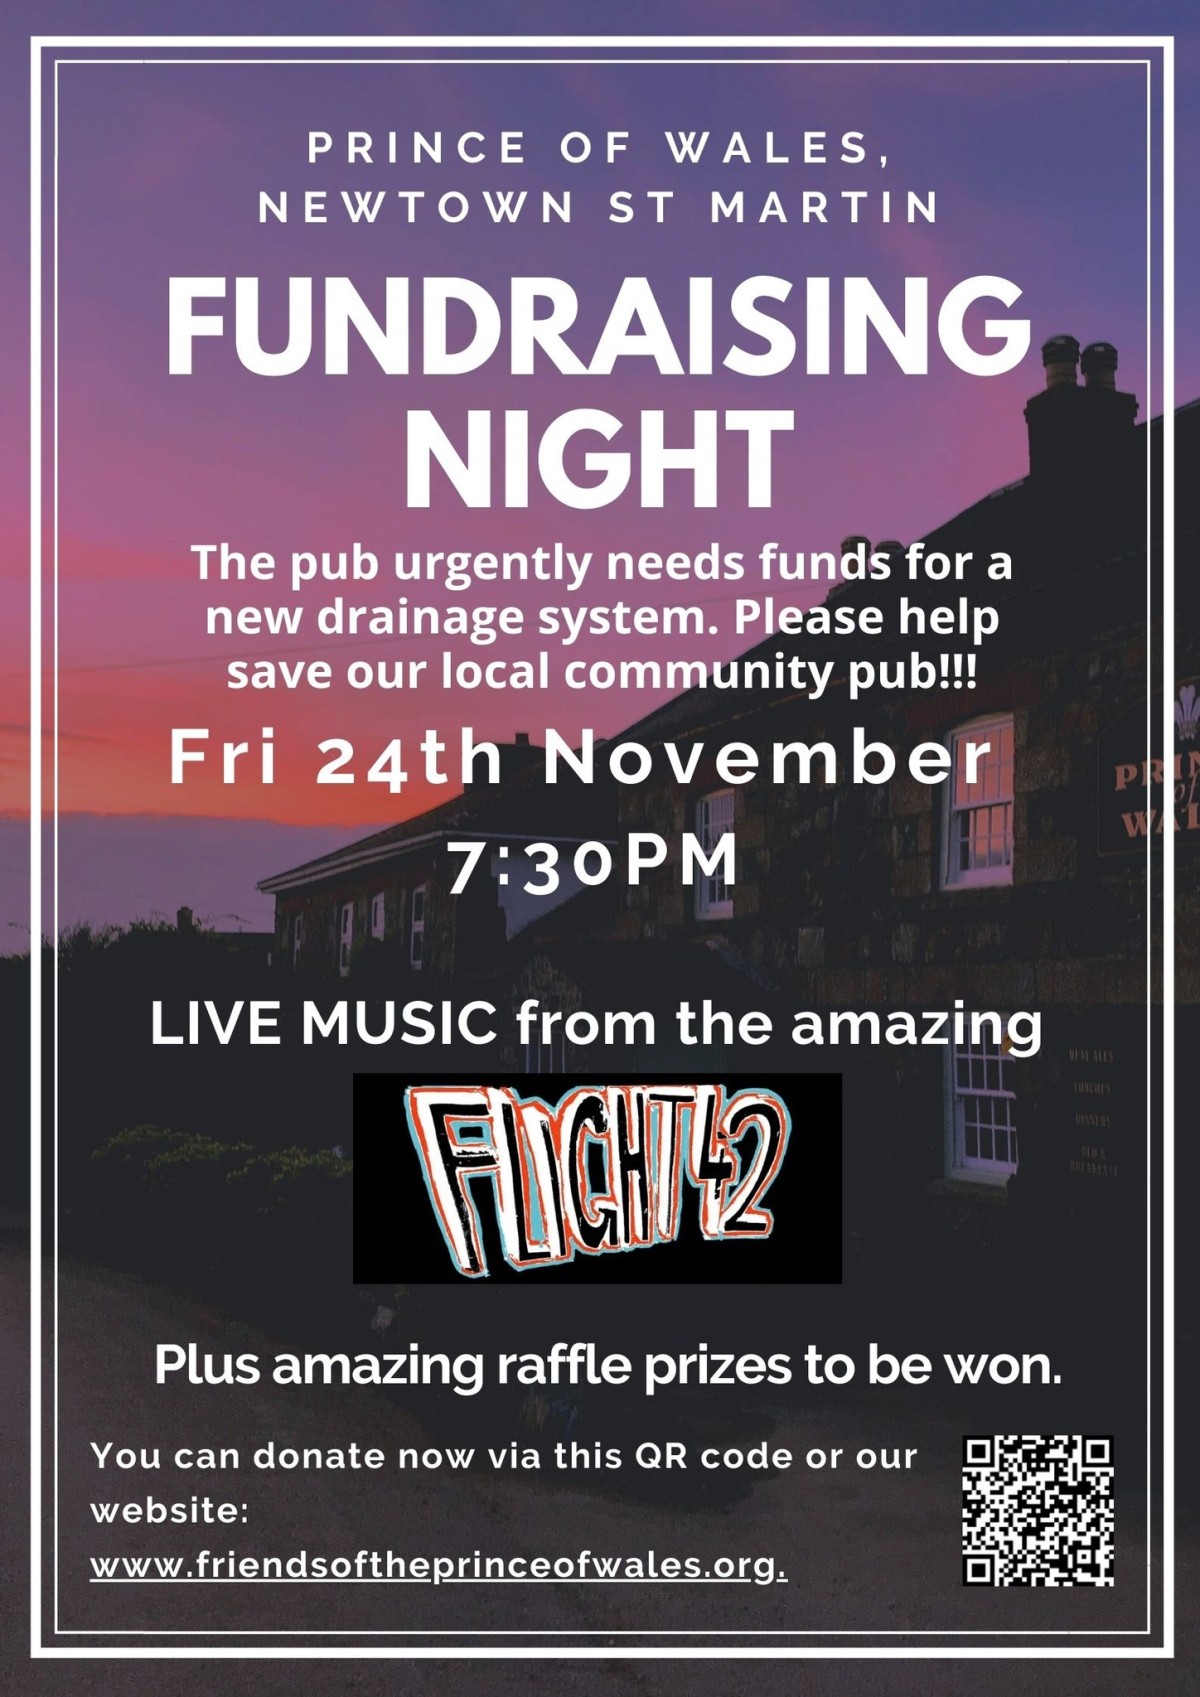 Huge thanks to local teenage band supporting our fundraising event on Fri 24th November